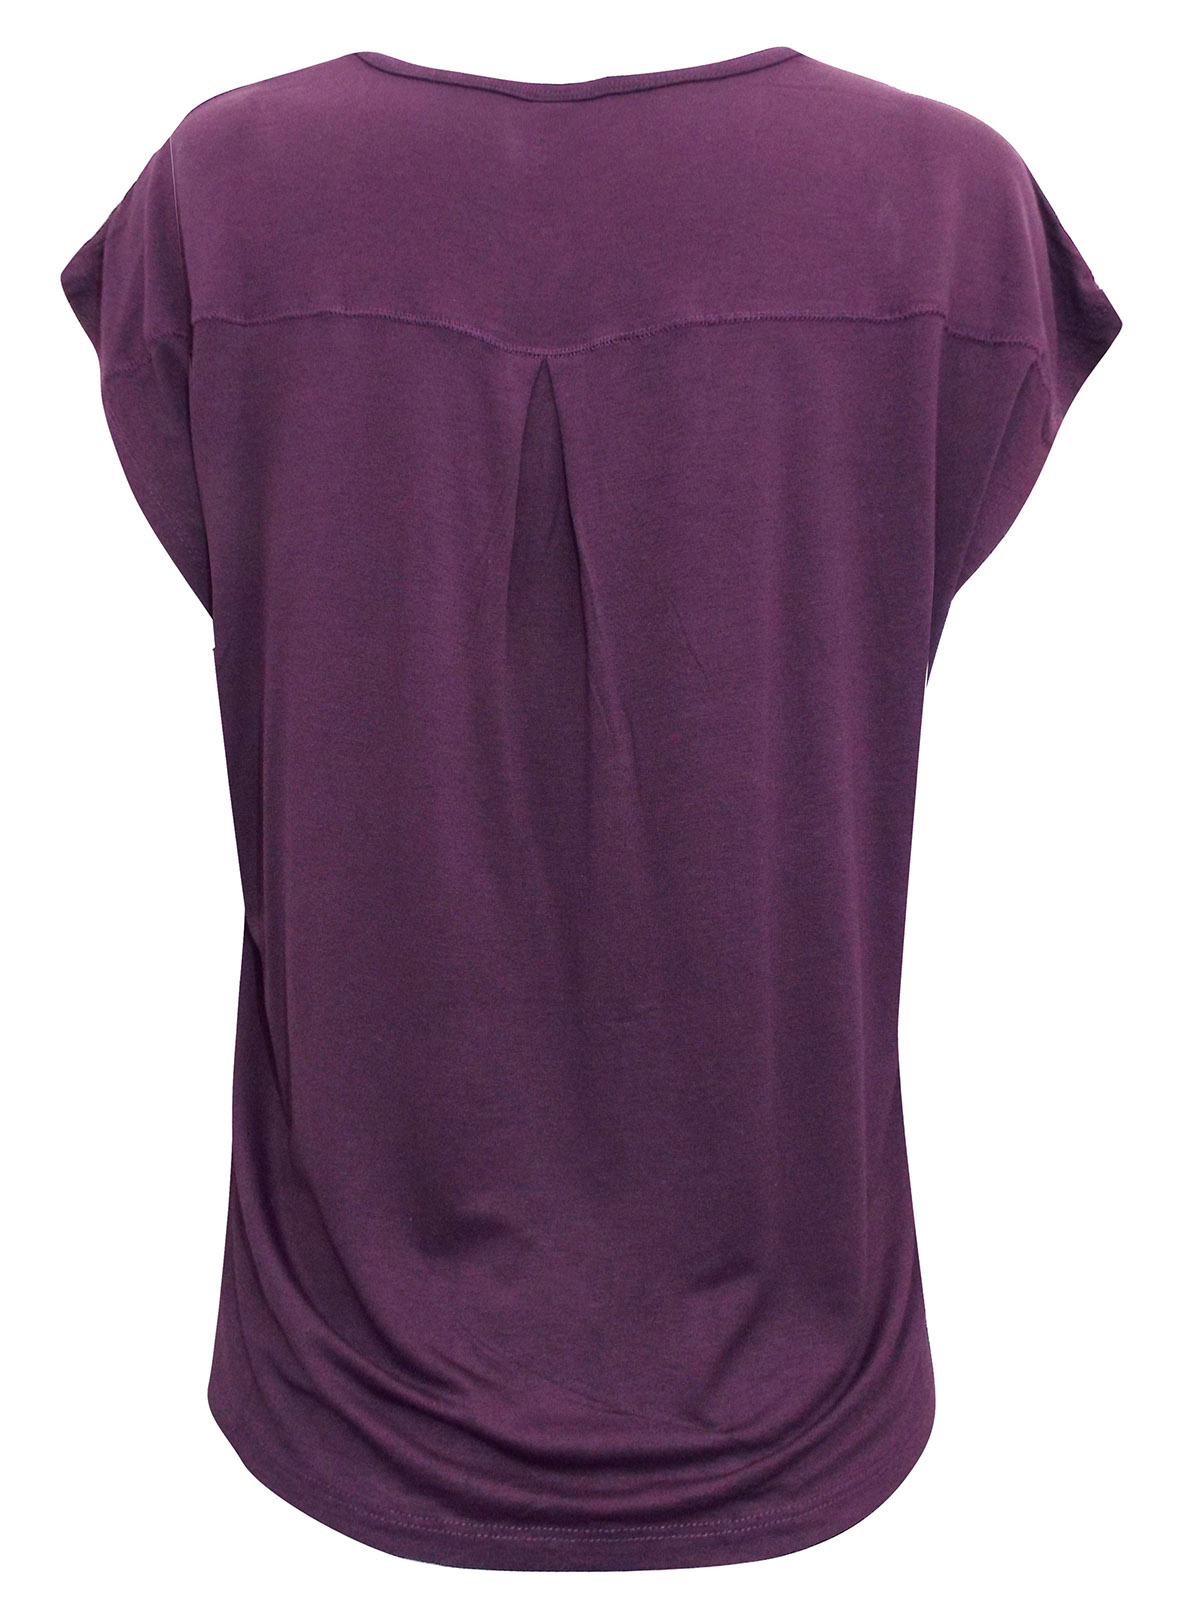 FAT FACE - - Fat Face Aubergine V-Neck Jersey Top - Size 8/10 to 12/14